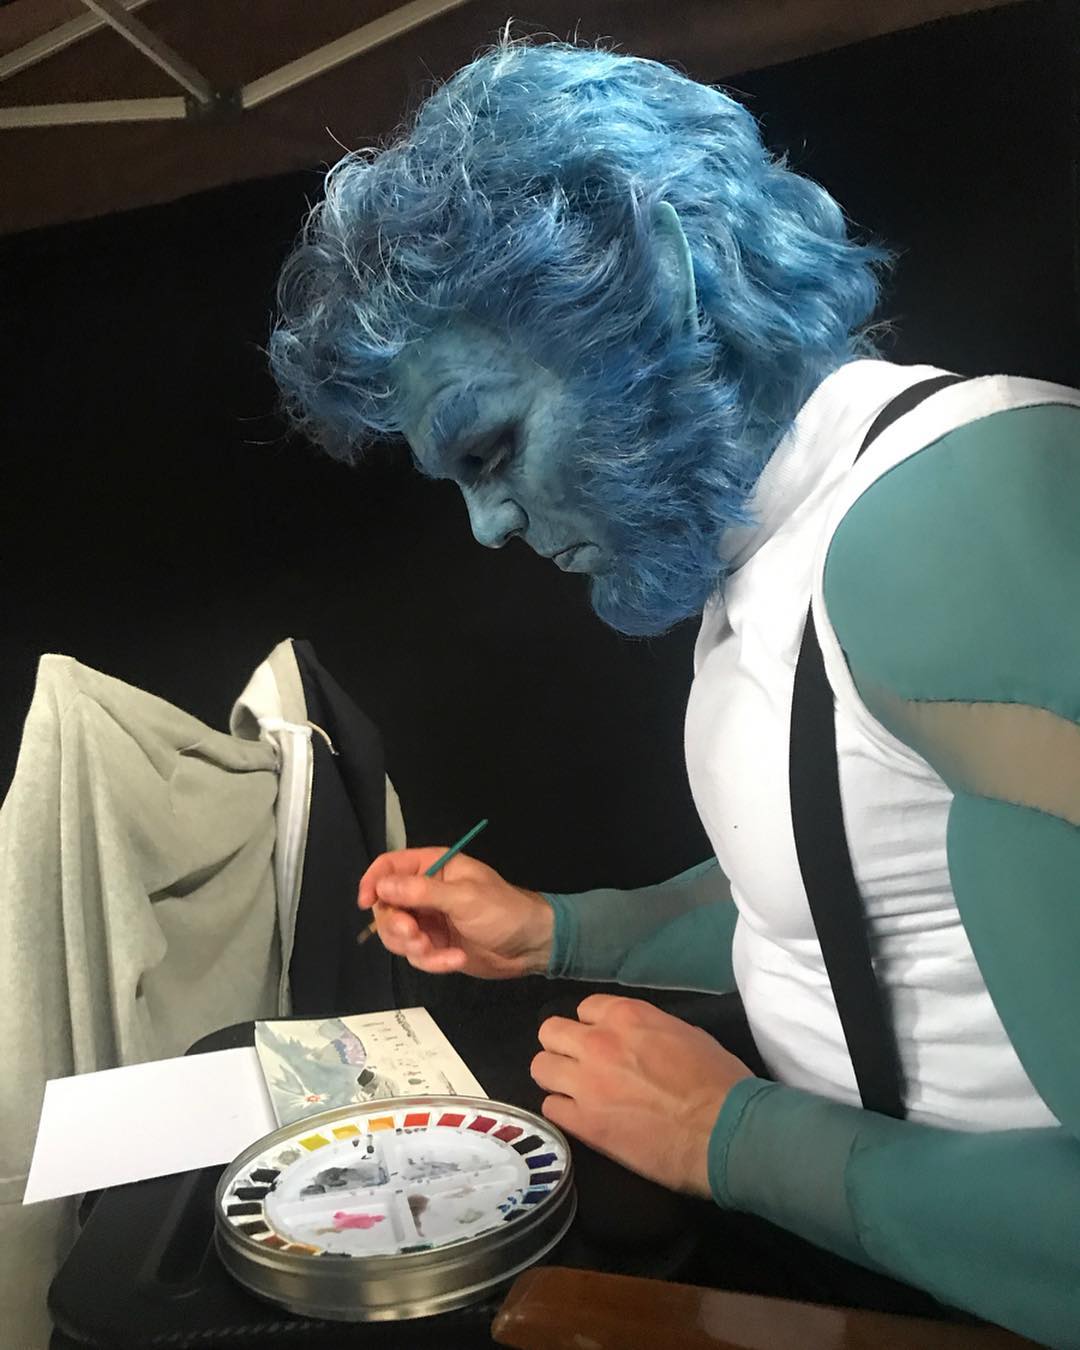 Beast from X-Men is drawing when he’s not busy.